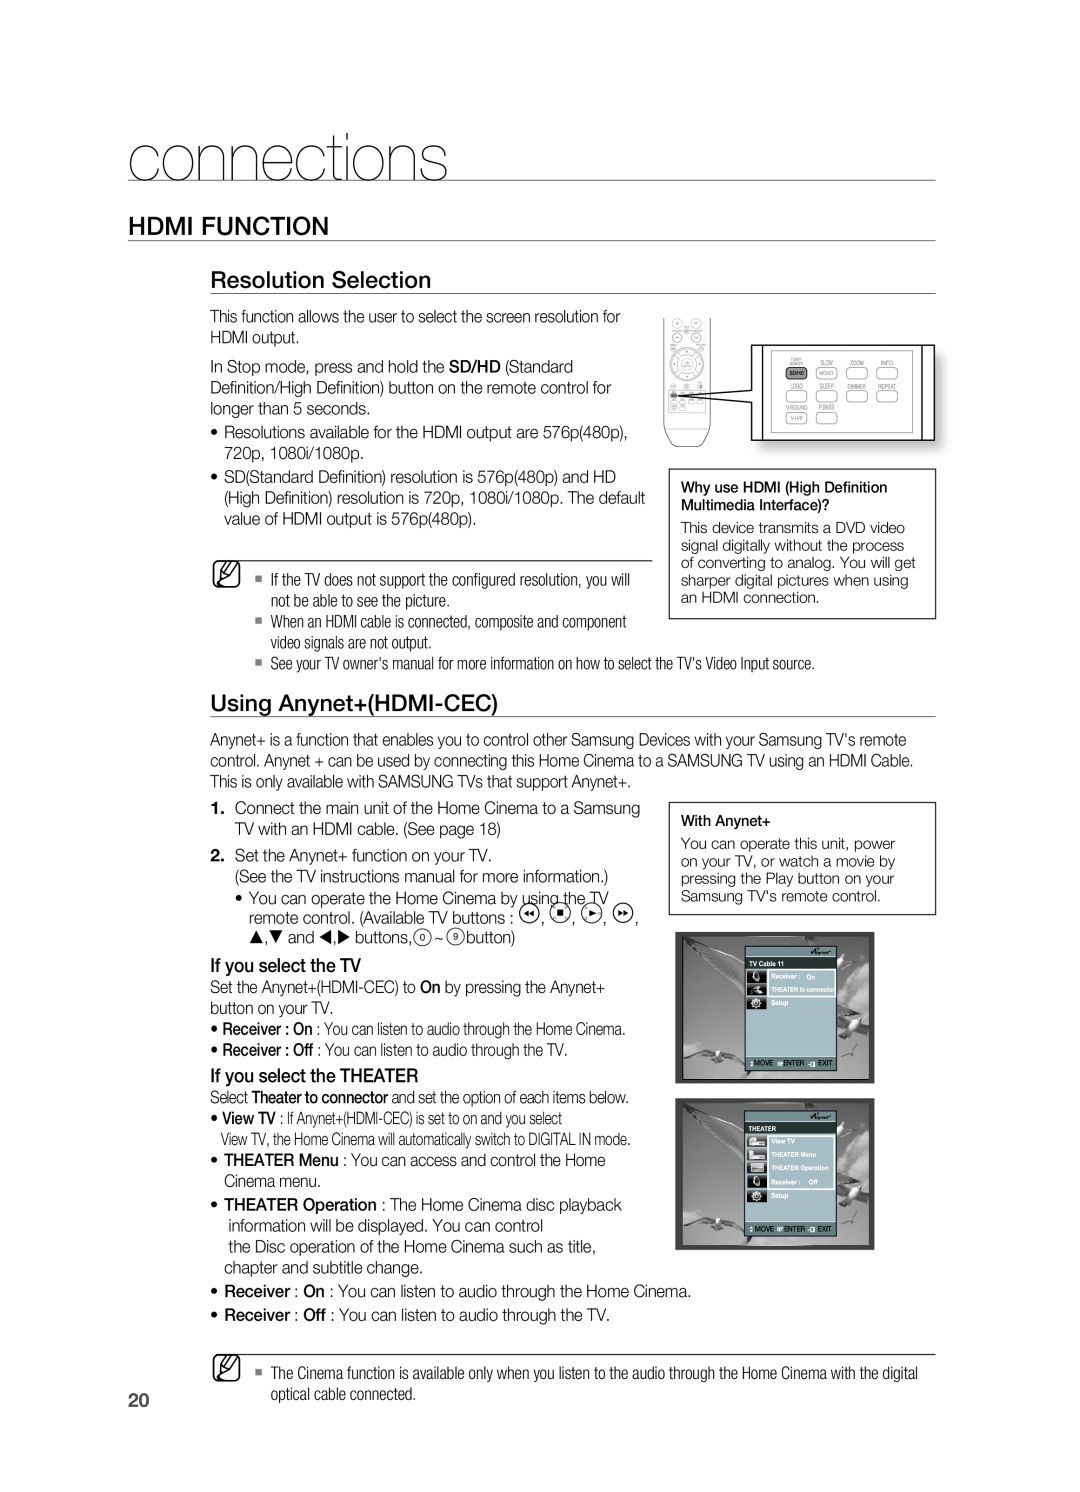 Samsung HT-X710 user manual Hdmi Function, resolution Selection, Using Anynet+HDMI-CEC, connections 